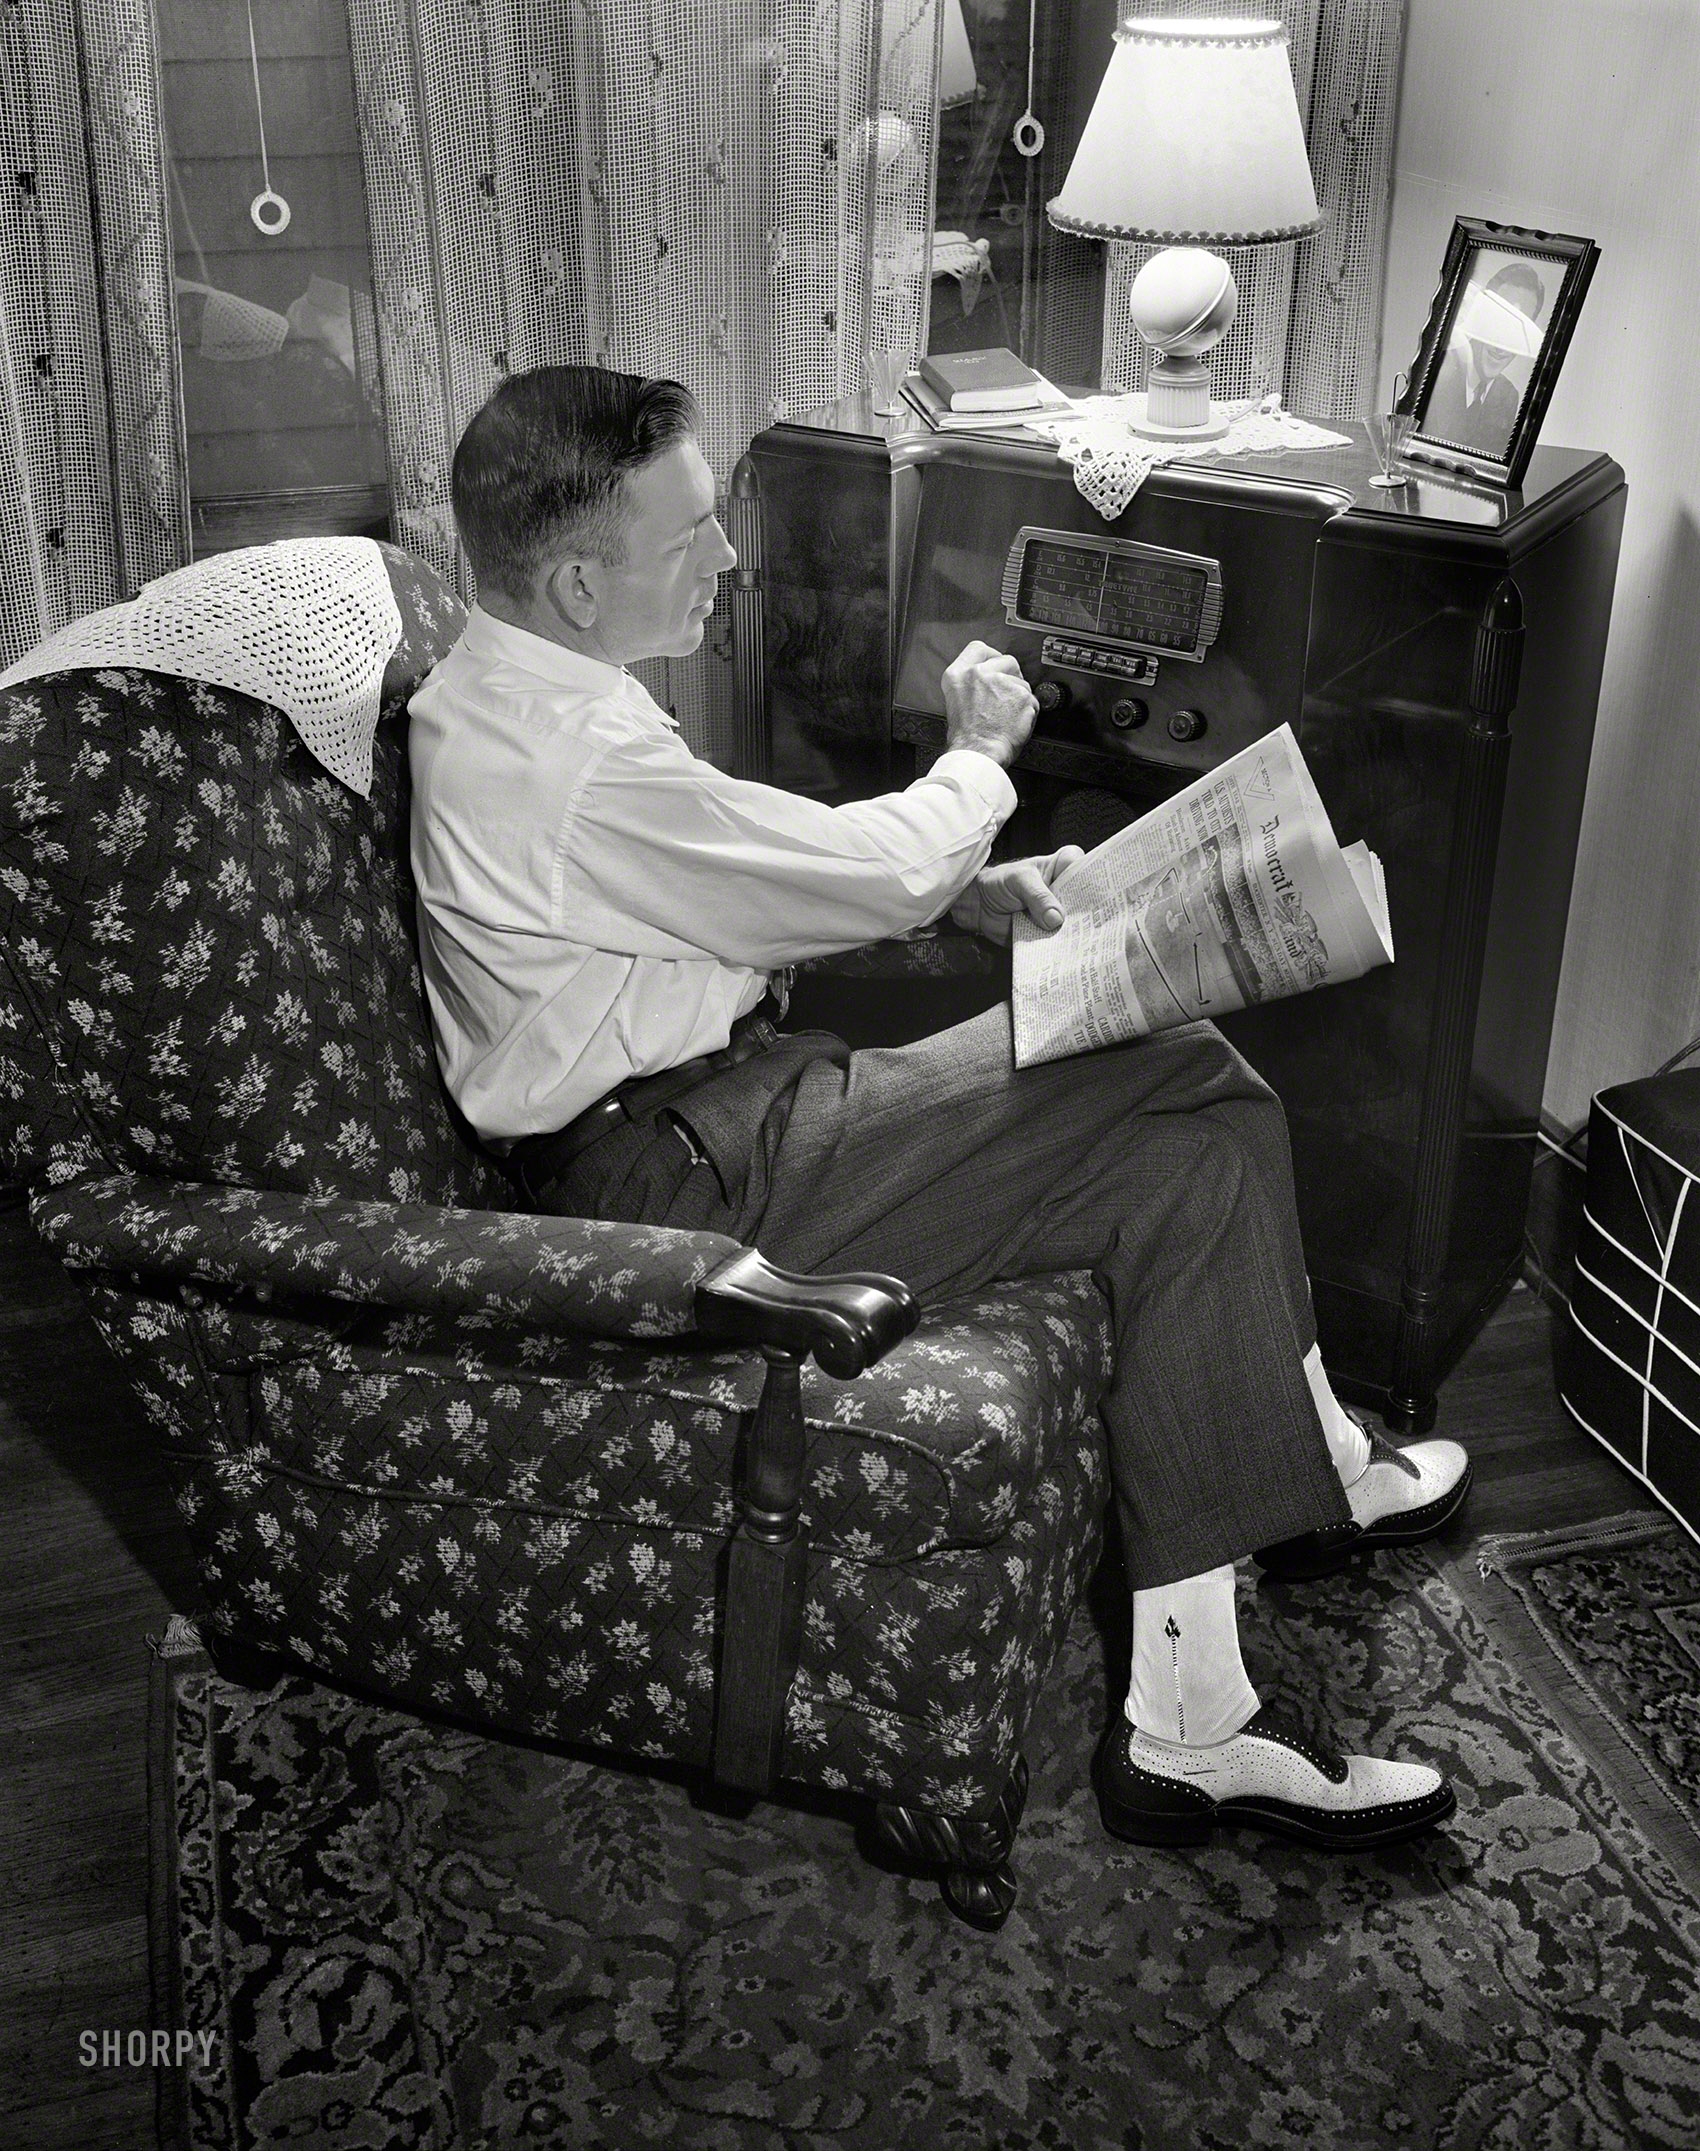 Rochester, New York. "Mr. Babcock tuning in for war news." Howard B. in the latest installment of the Babcock saga; the photos, with a publication date of March 1943, seem to be from September 1942 if the newspaper is indeed new. Photo by Ralph Amdursky for the Office of War Information. View full size.